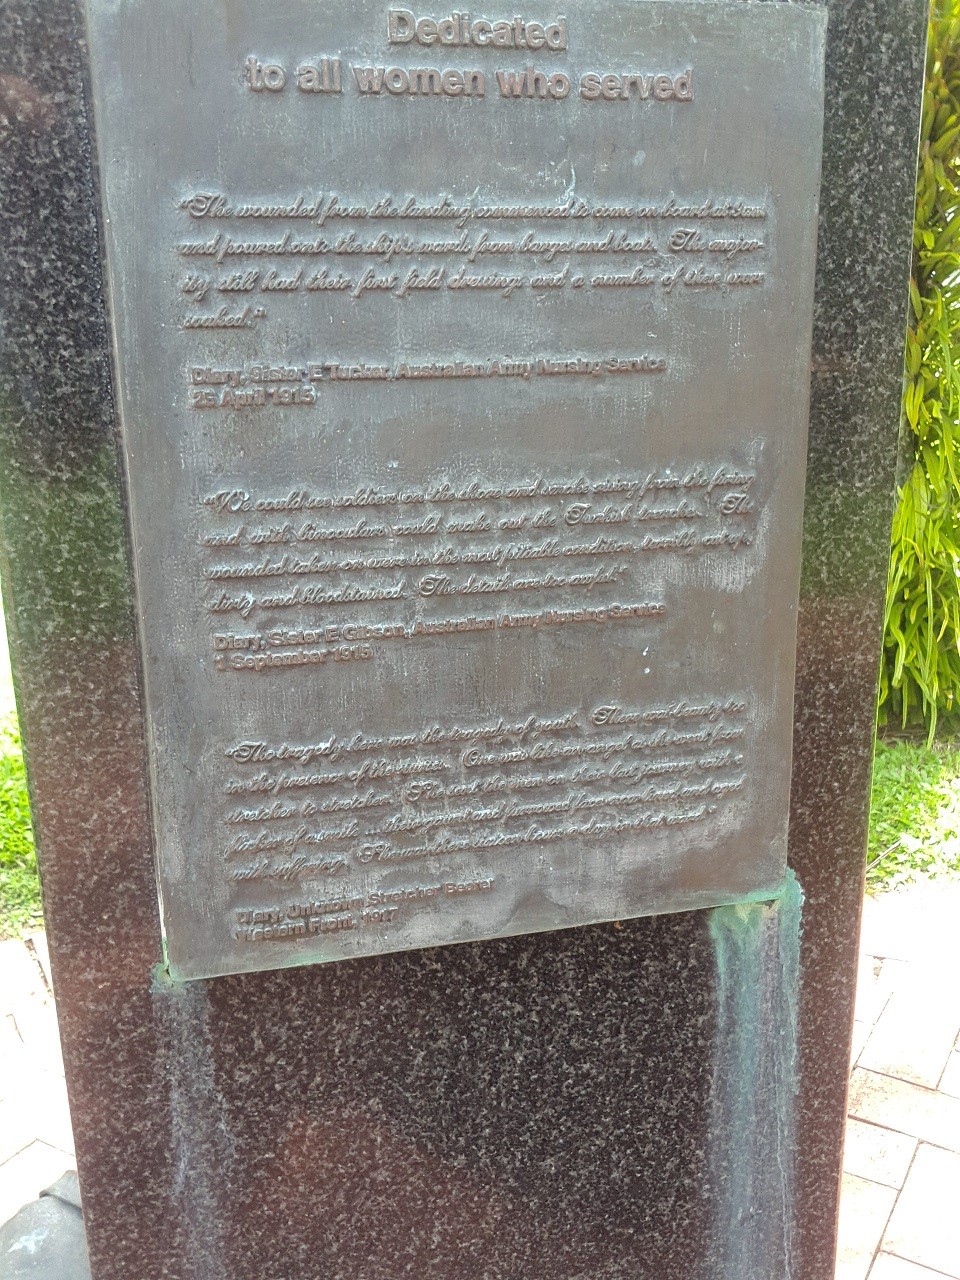 The inscription mounted on this column is dedicated to all the women who served Photo by Anne Scheu State Library of Queensland February 2017 